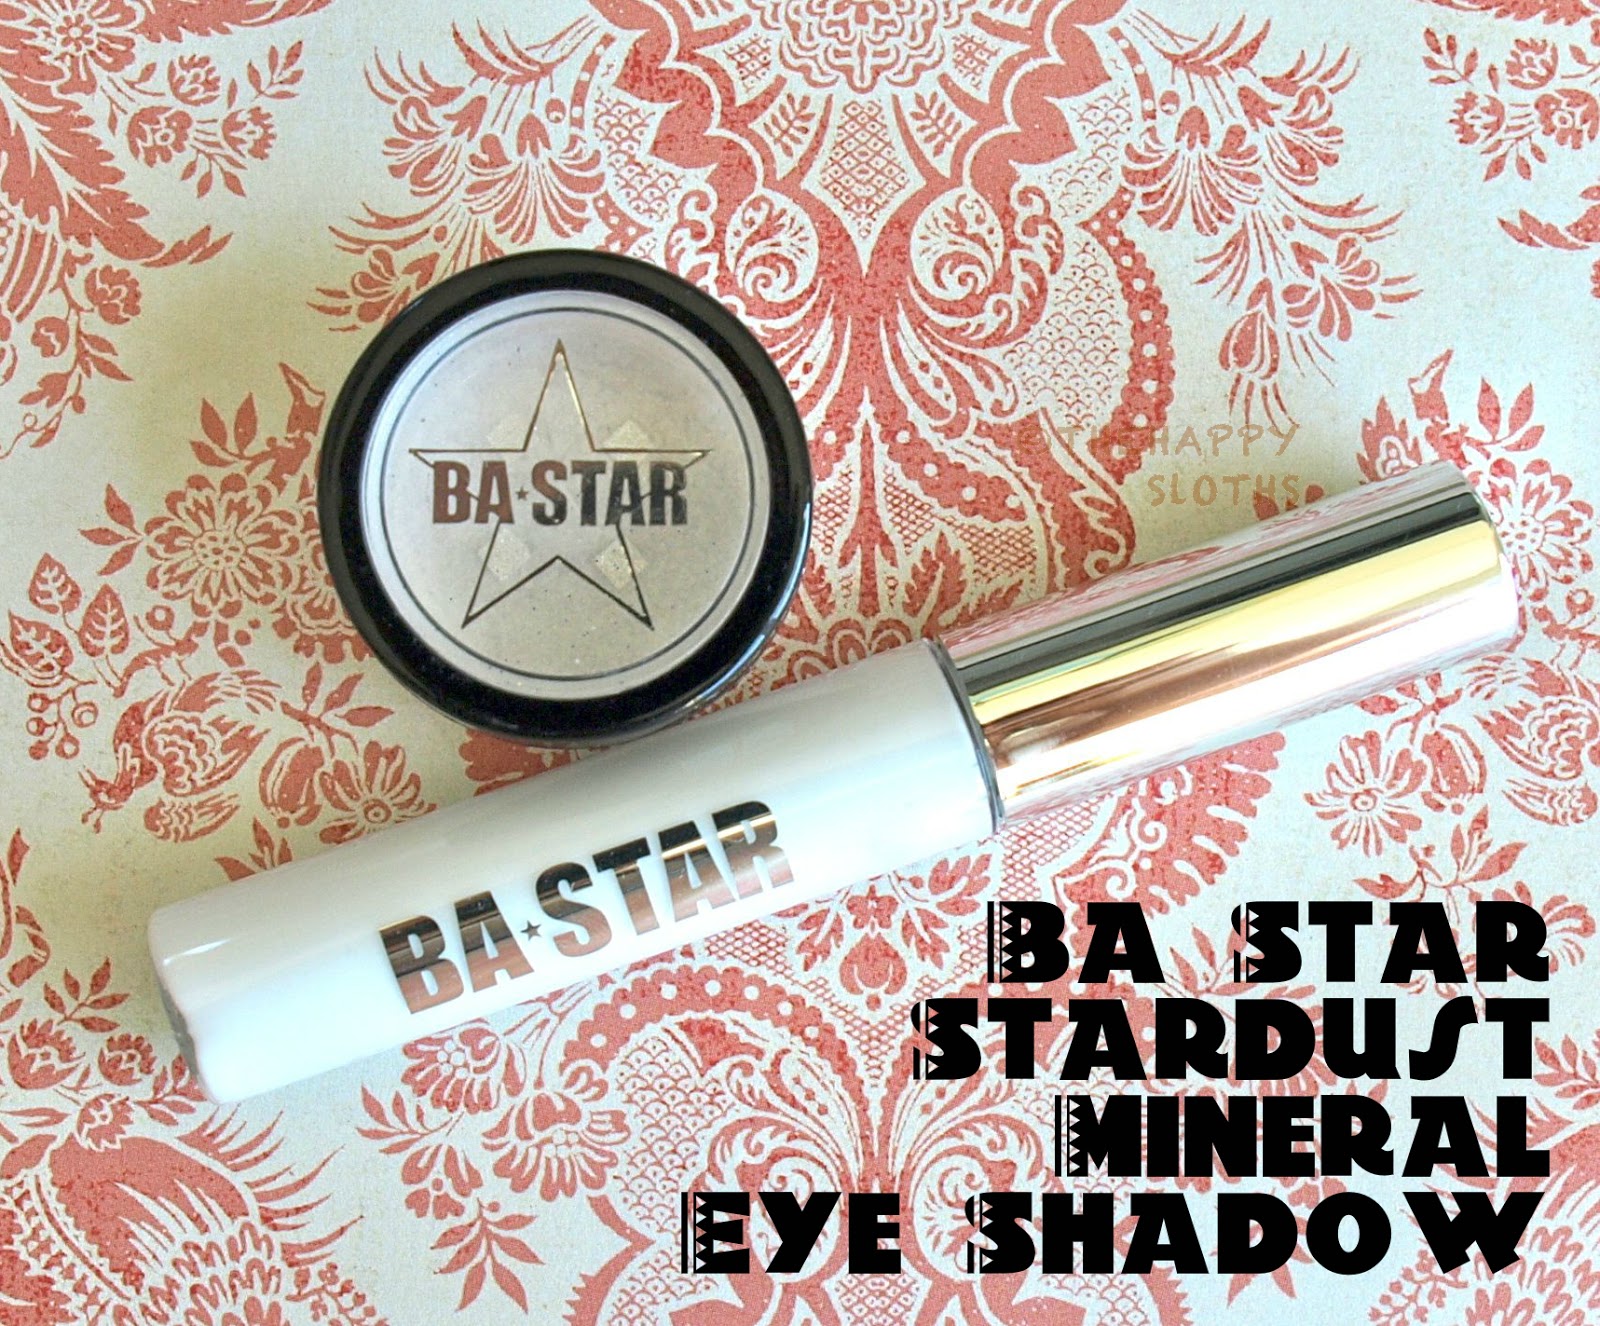 Uforenelig jeg er træt transportabel BA STAR "Diamond Star Dust" Mineral Eye Shadow: Review and Swatches | The  Happy Sloths: Beauty, Makeup, and Skincare Blog with Reviews and Swatches